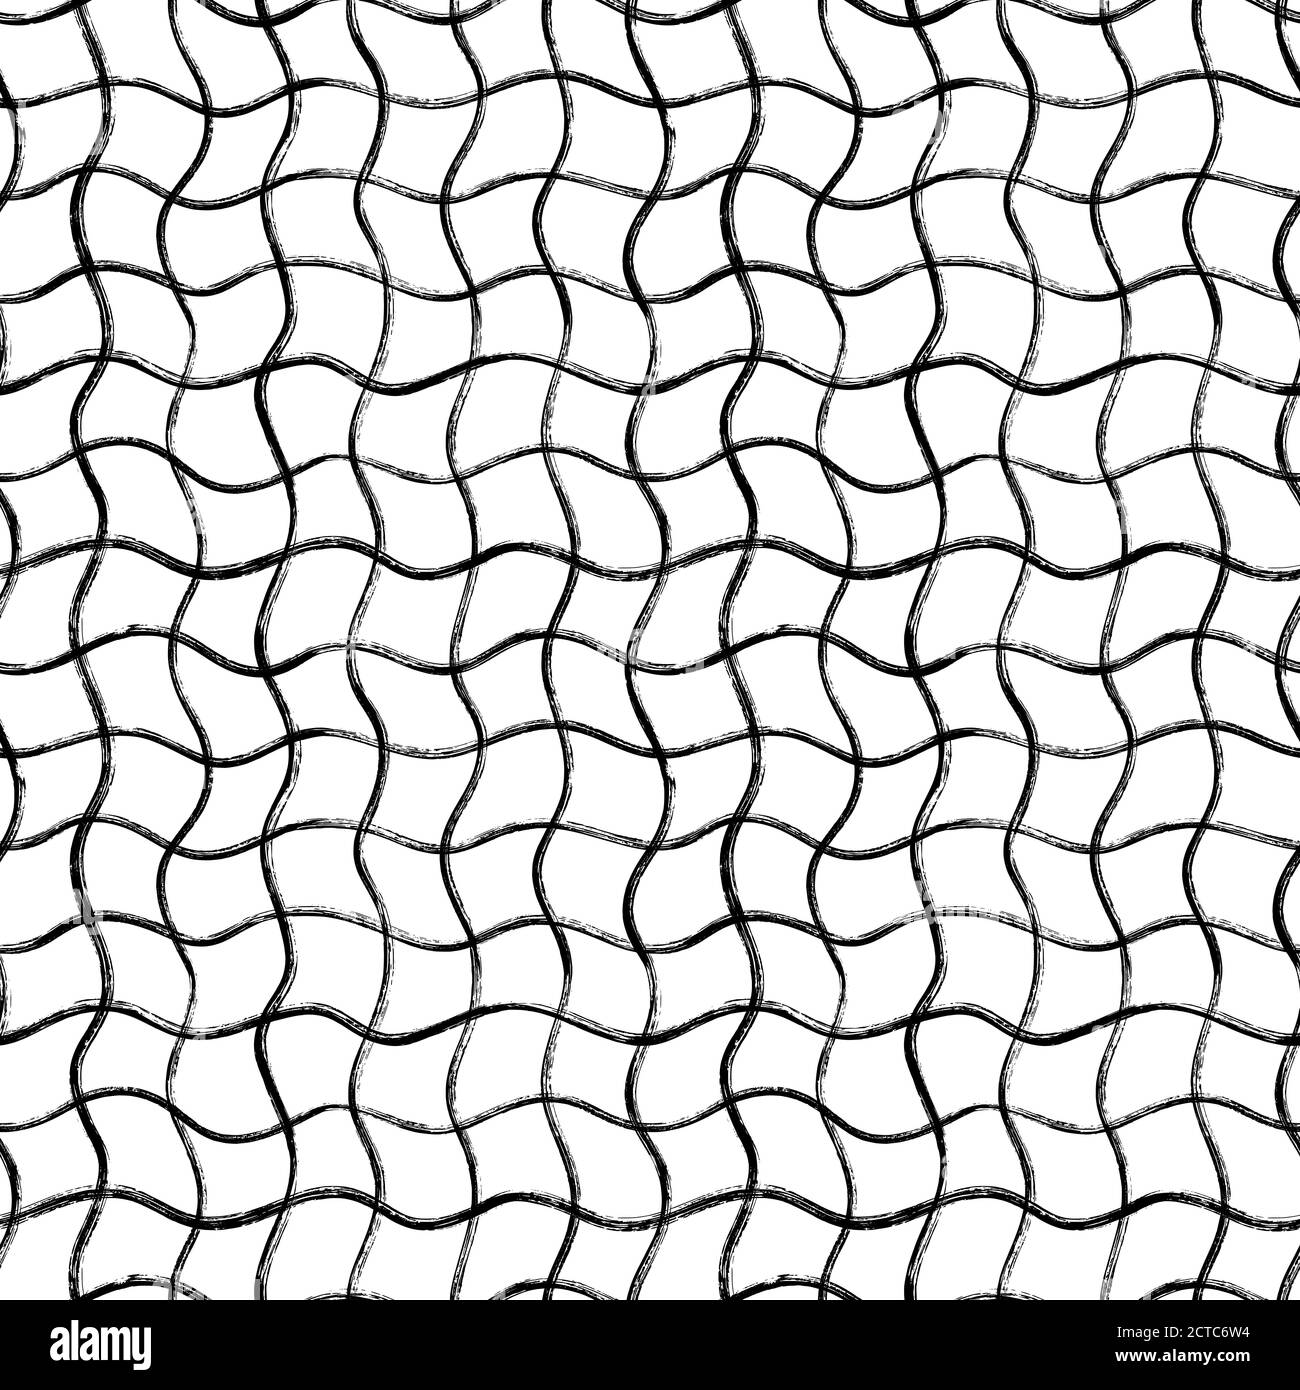 Black curved grid vector seamless pattern.  Stock Vector